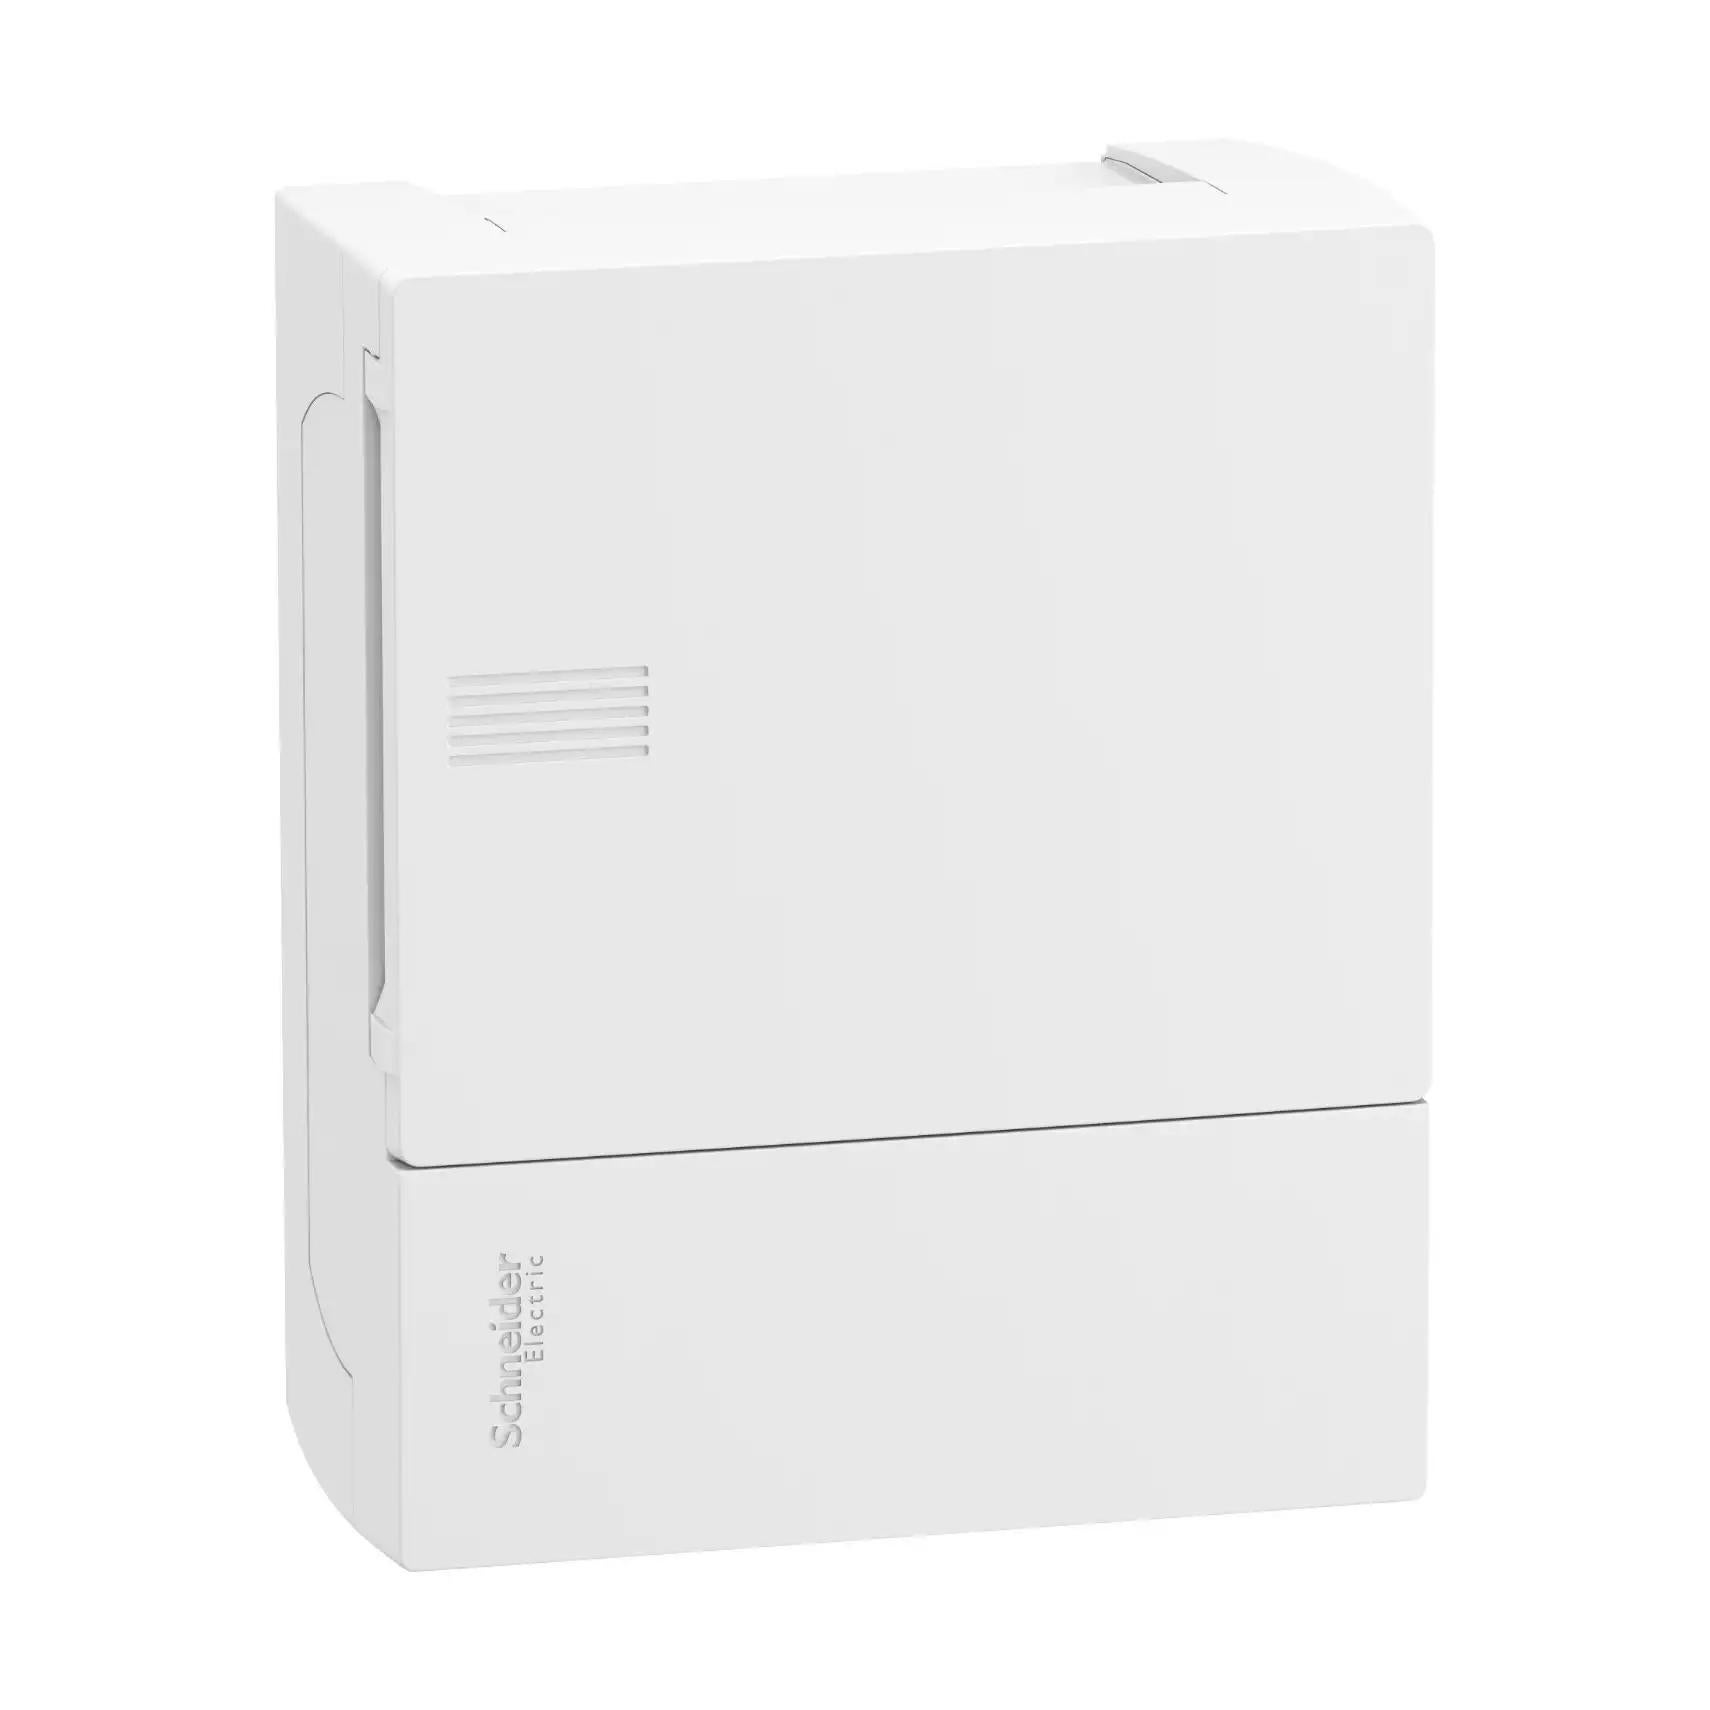 Enclosure, Resi9 MP, surface mounting, 1 row of 6 modules, IP40, white door, 1 earth + 1 neutral terminal blocks